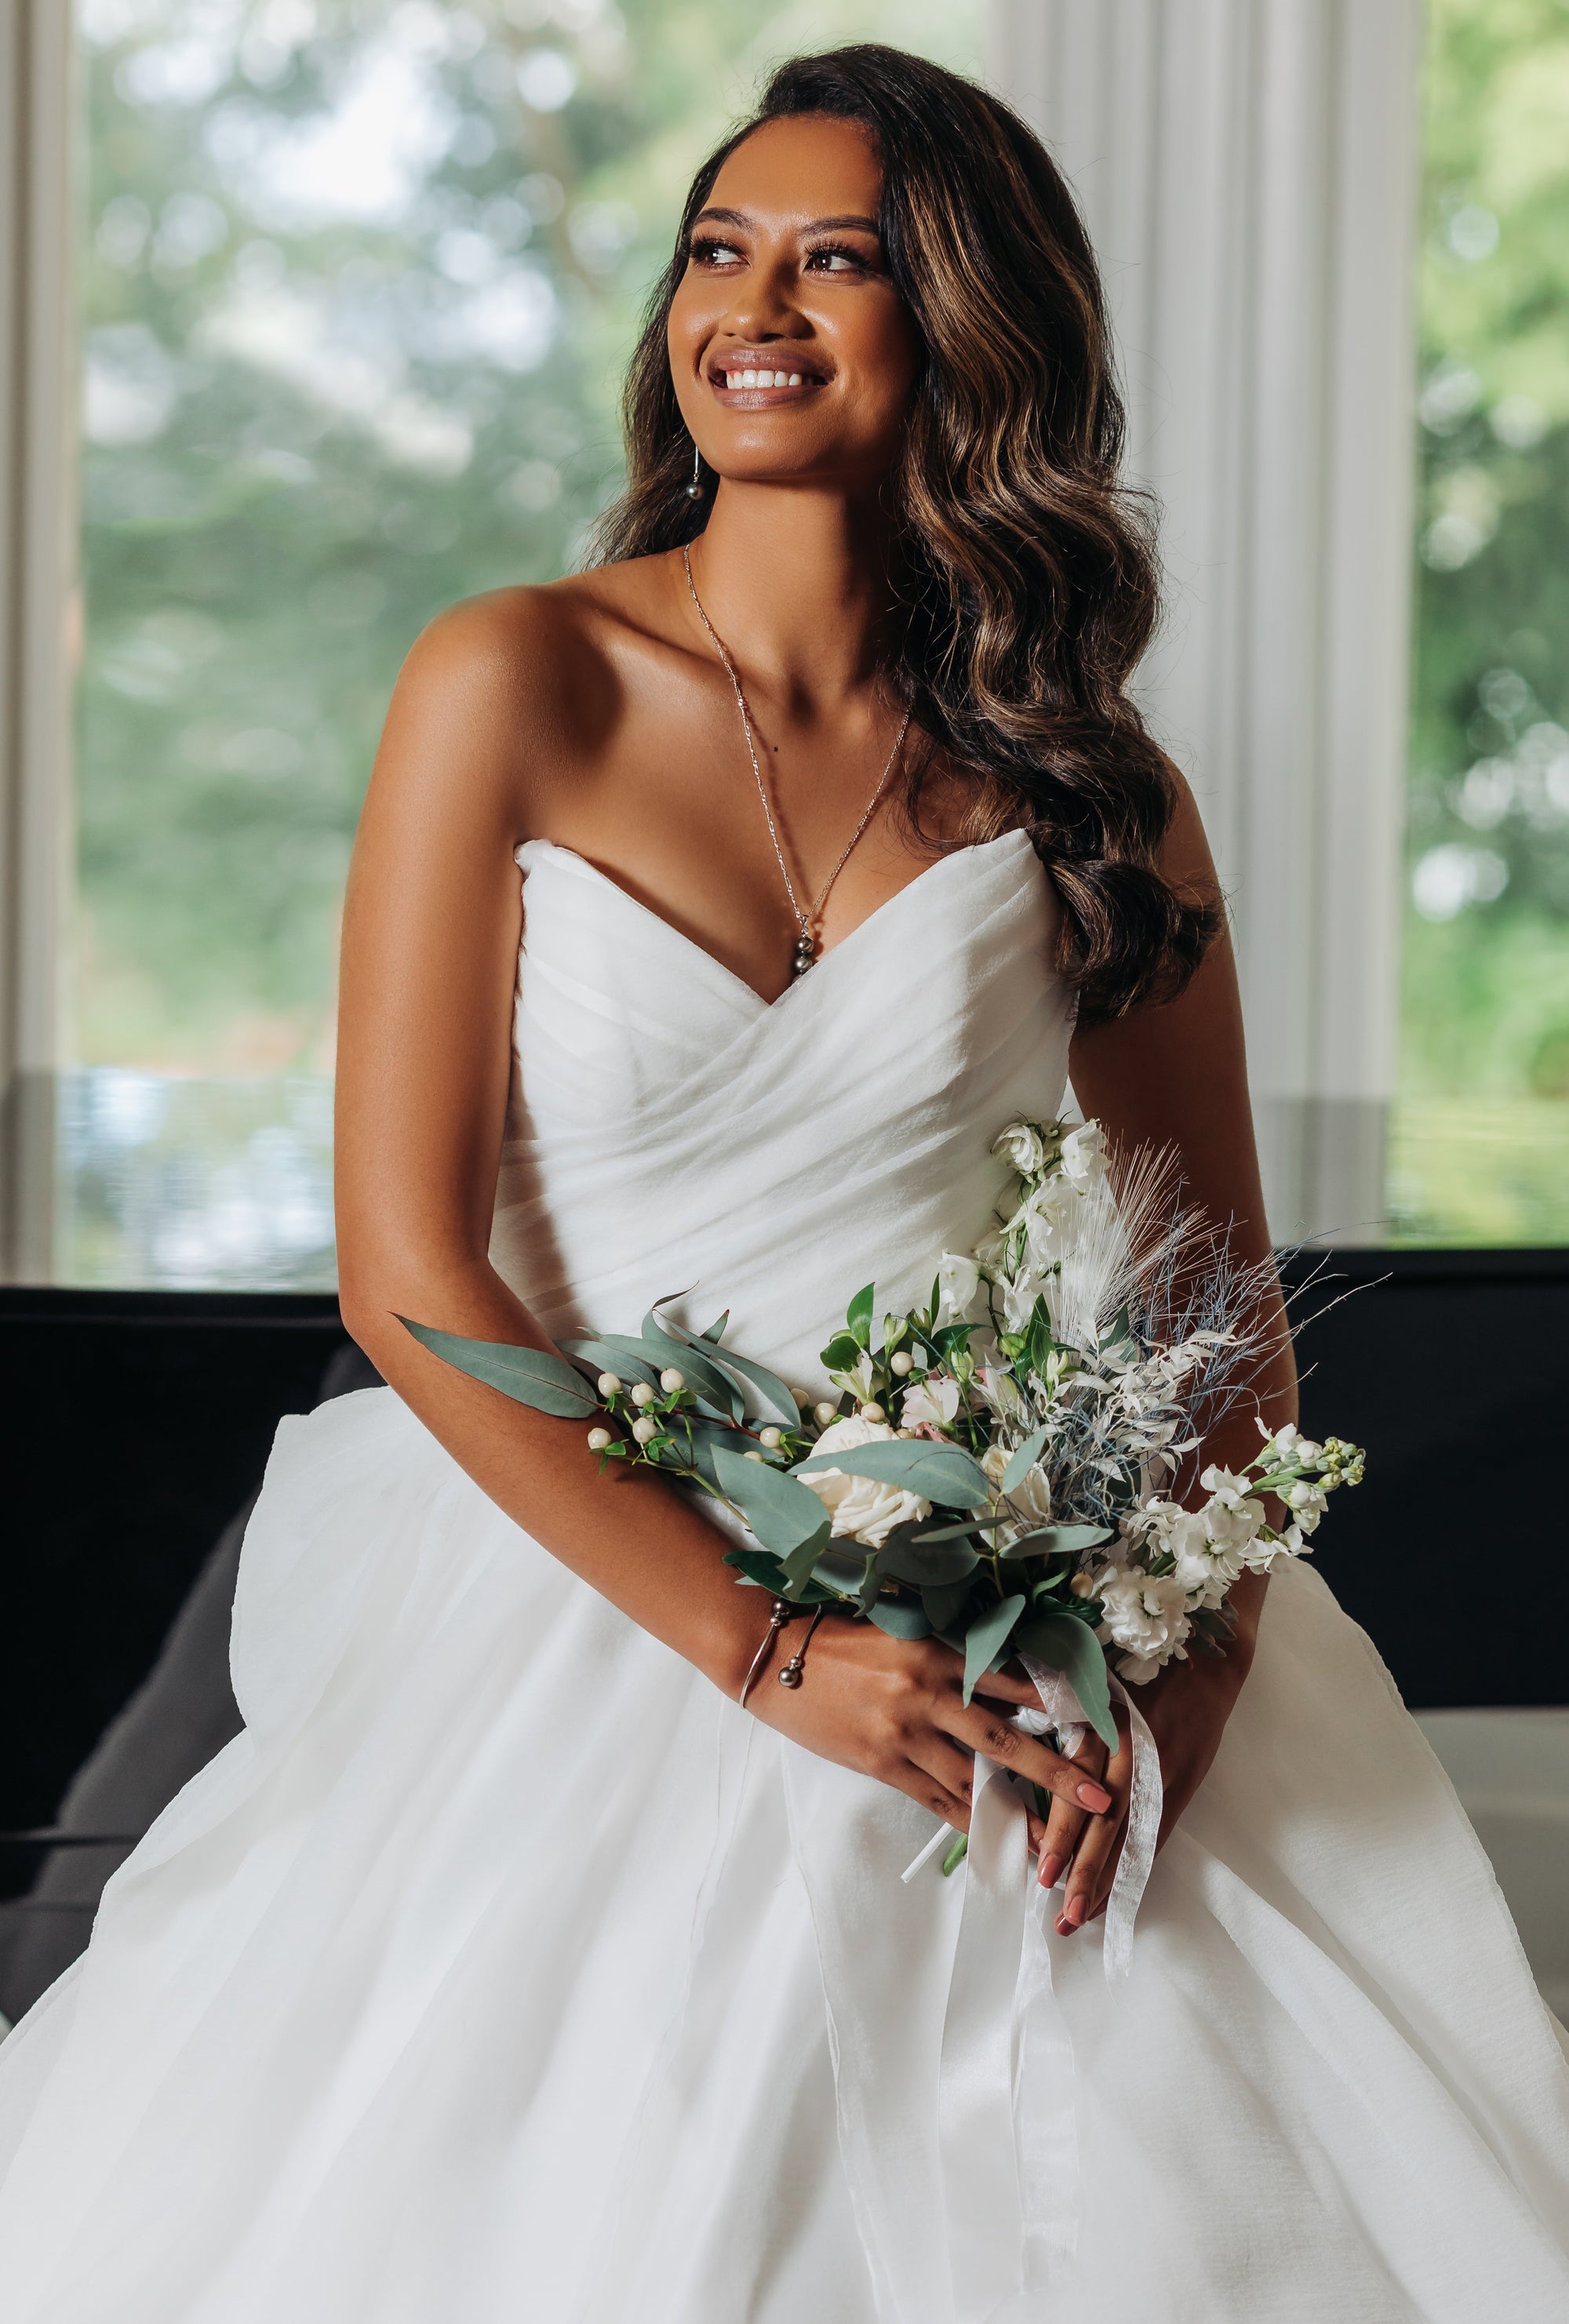 15 Reasons to Fall in Love With a Simple Wedding Dress